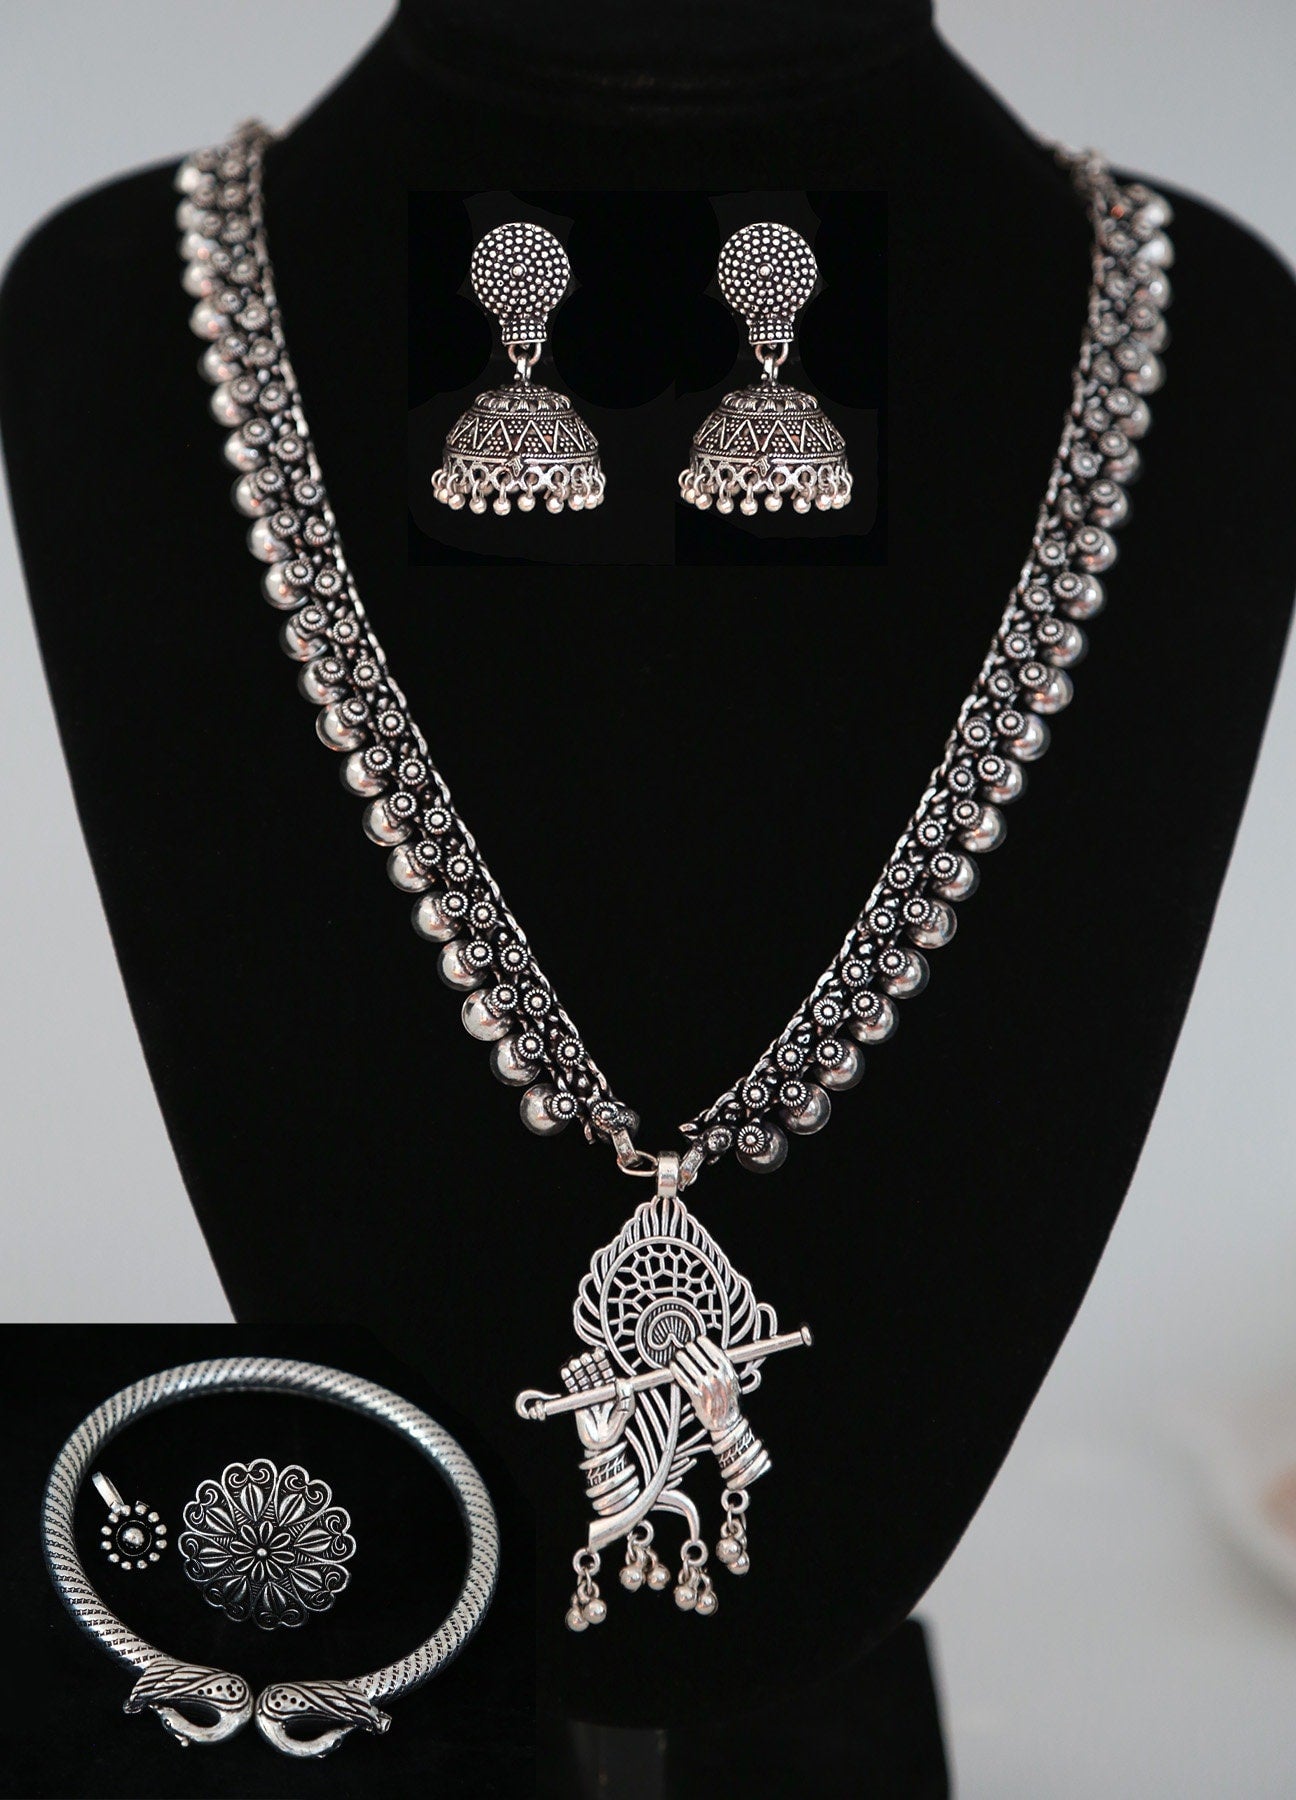 Traditional Oxidized Silver Jewelry Set with Radha Krishna Pendant, Jhumka Earrings,Bracelet,Ring and Nose clip|Indian Ethnic Temple Jewelry